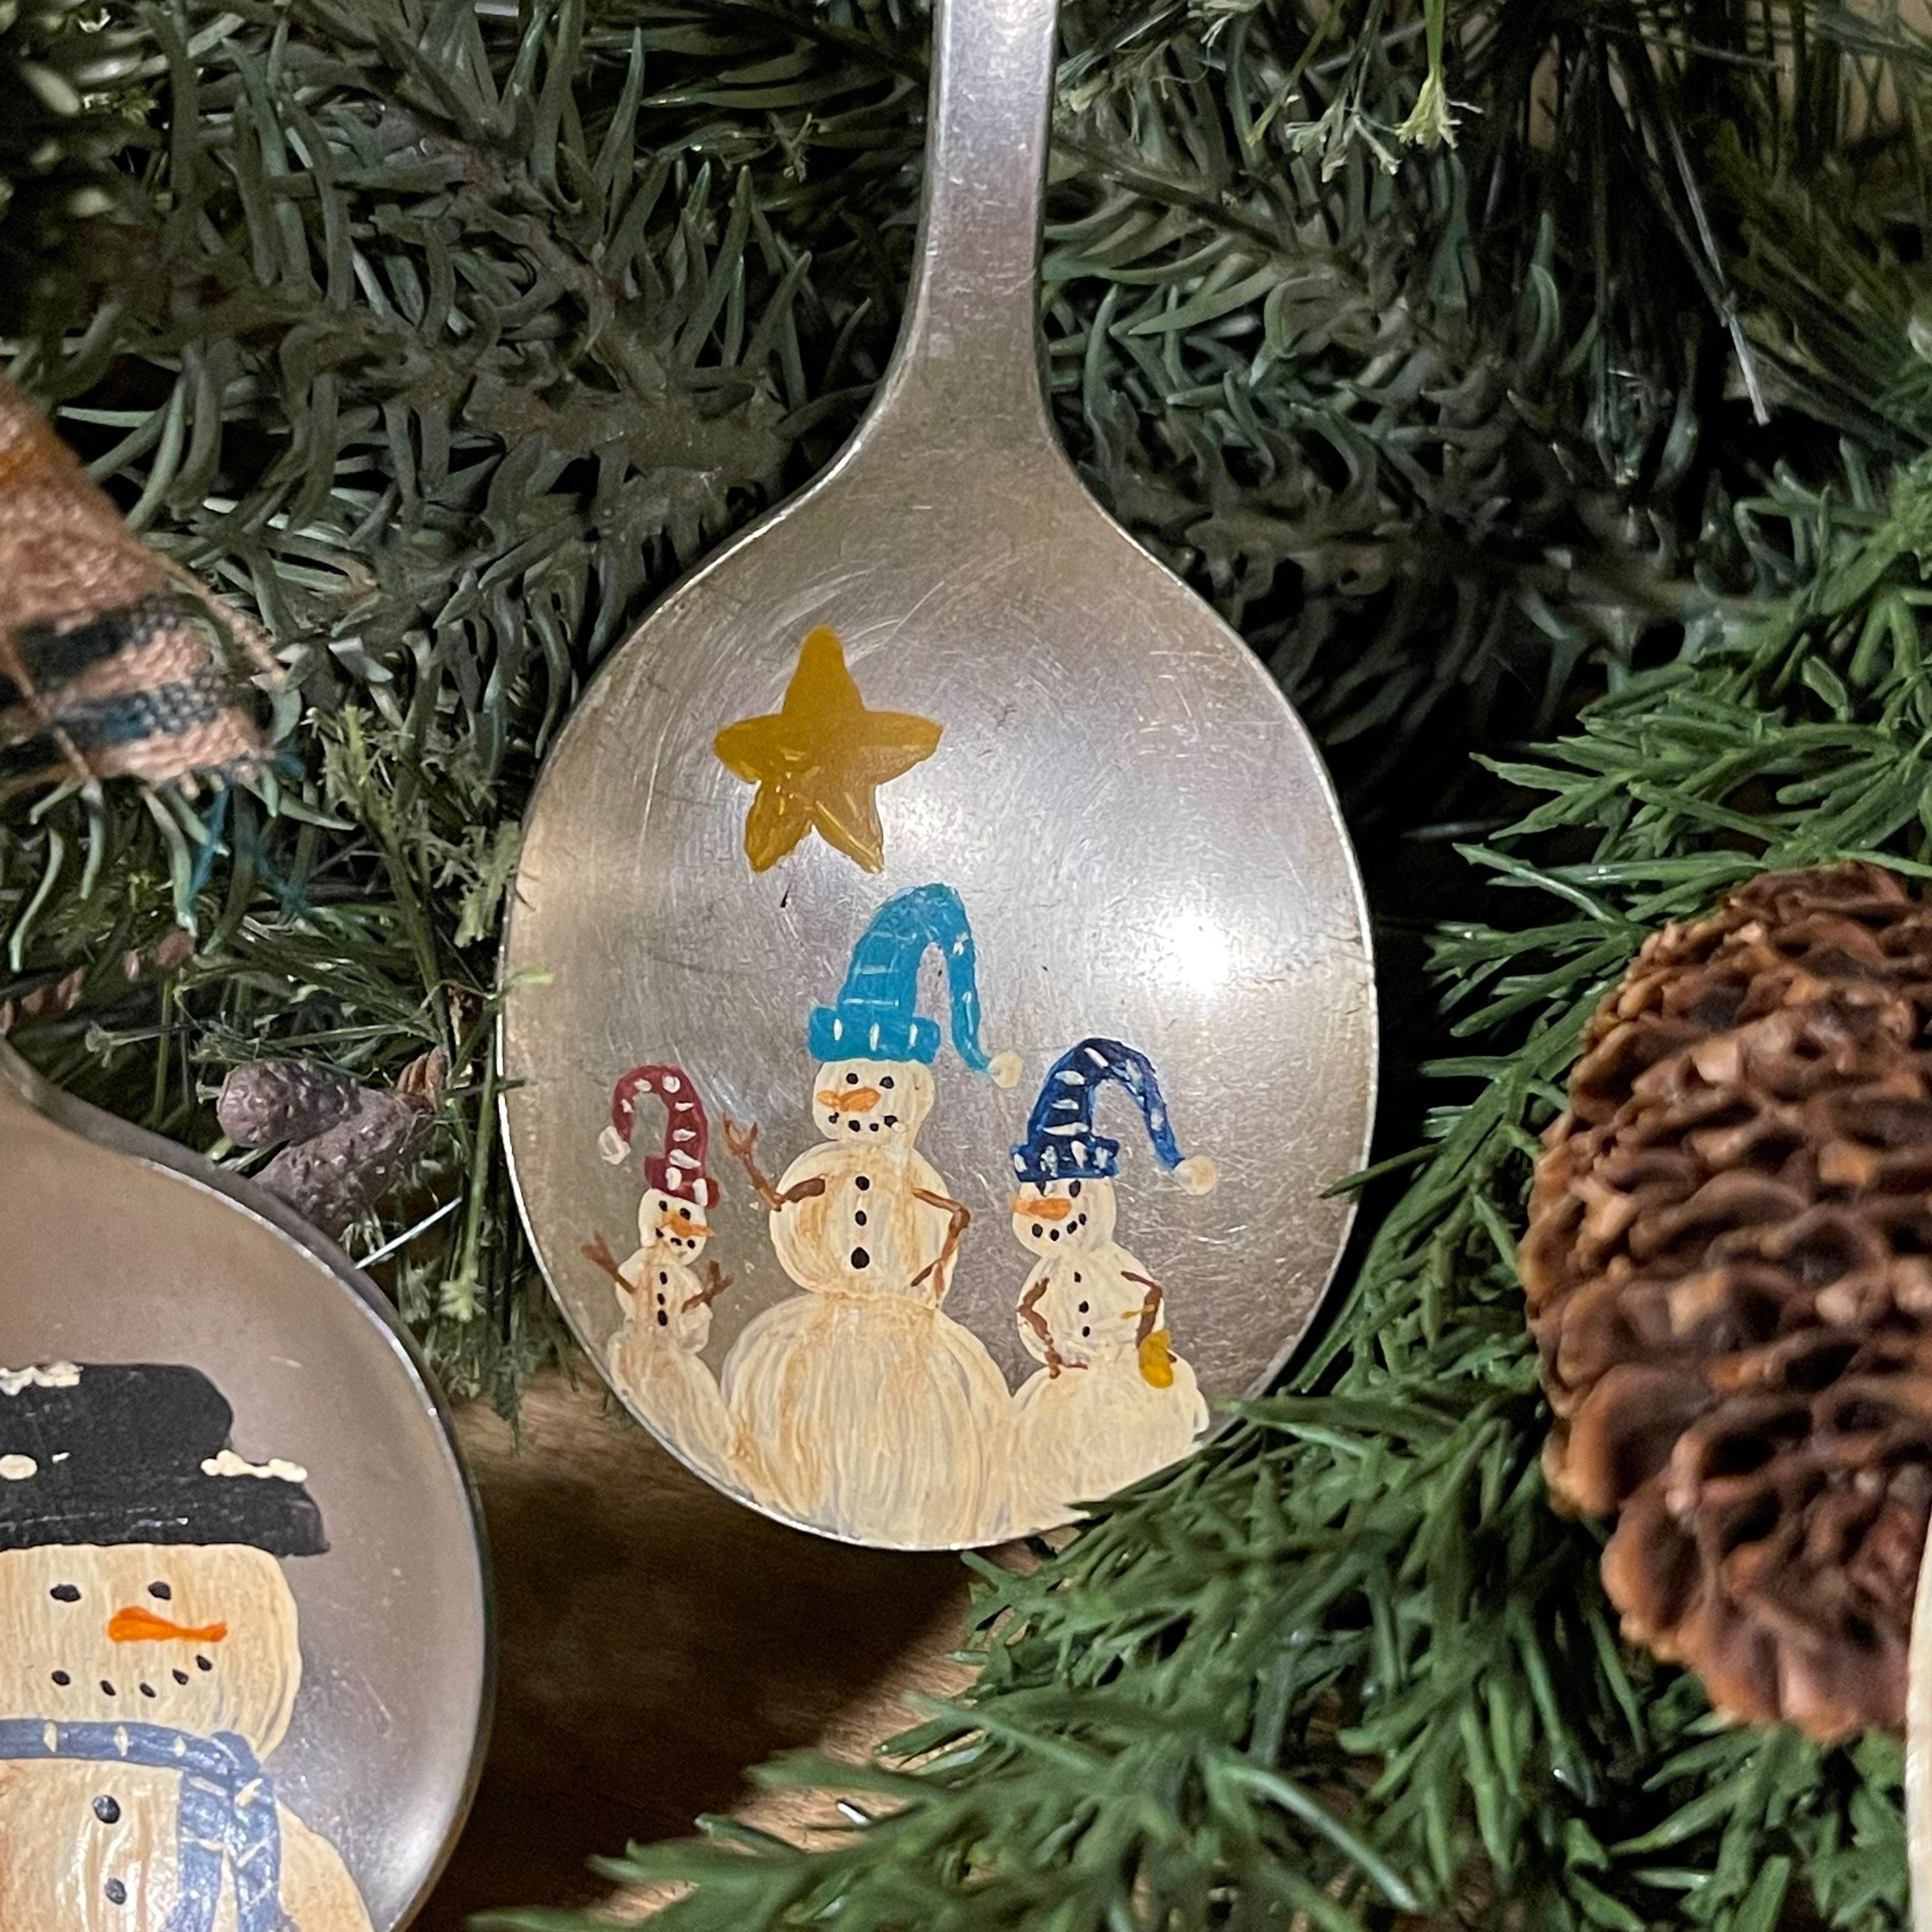 4 Christmas Measuring Spoons Glass Ornament by Place & Time